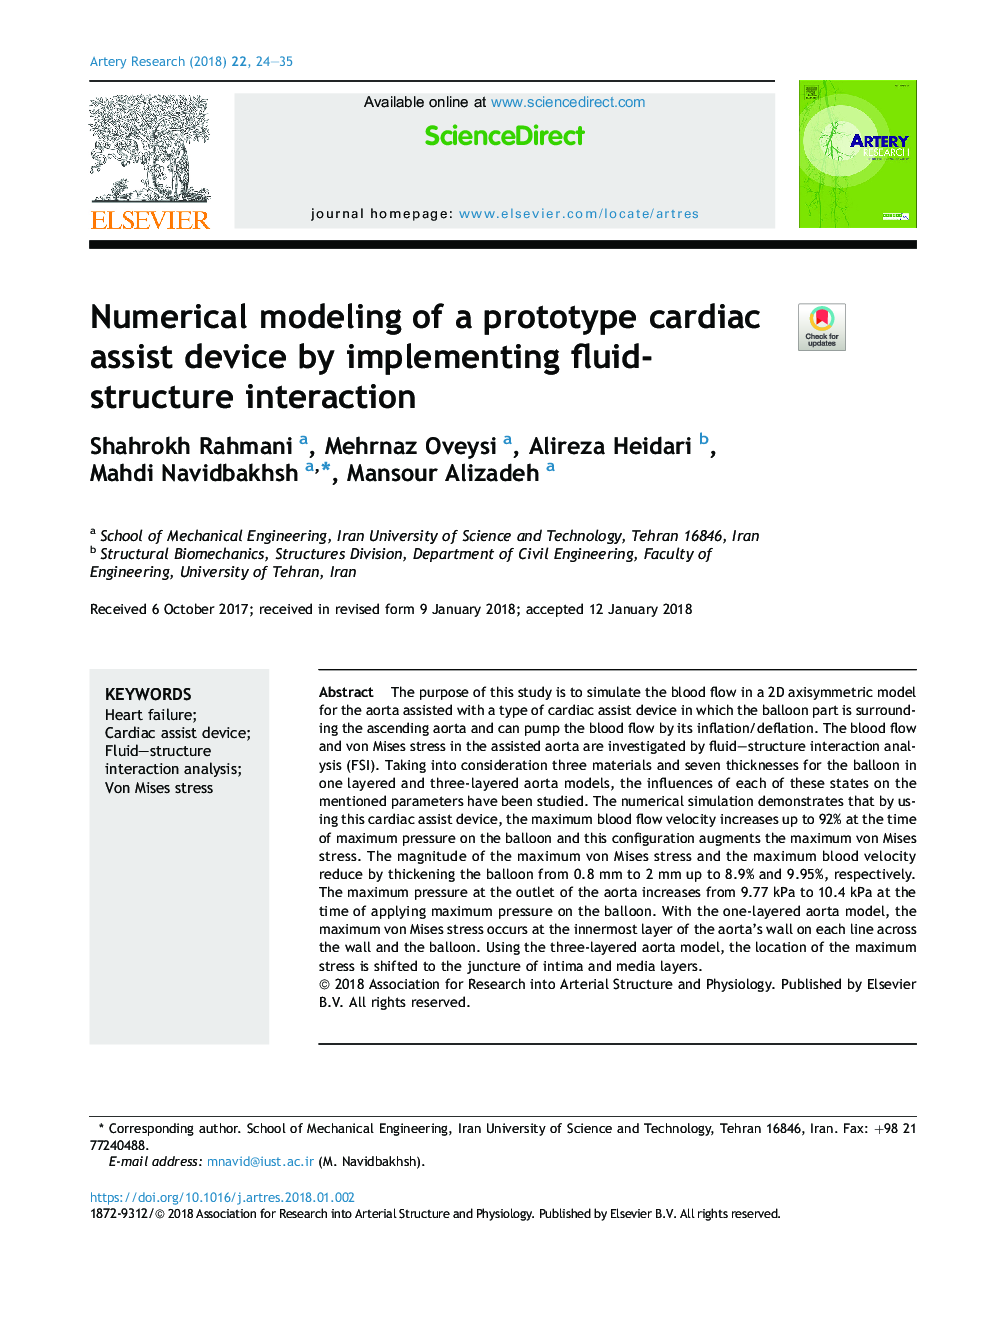 Numerical modeling of a prototype cardiac assist device by implementing fluid-structure interaction